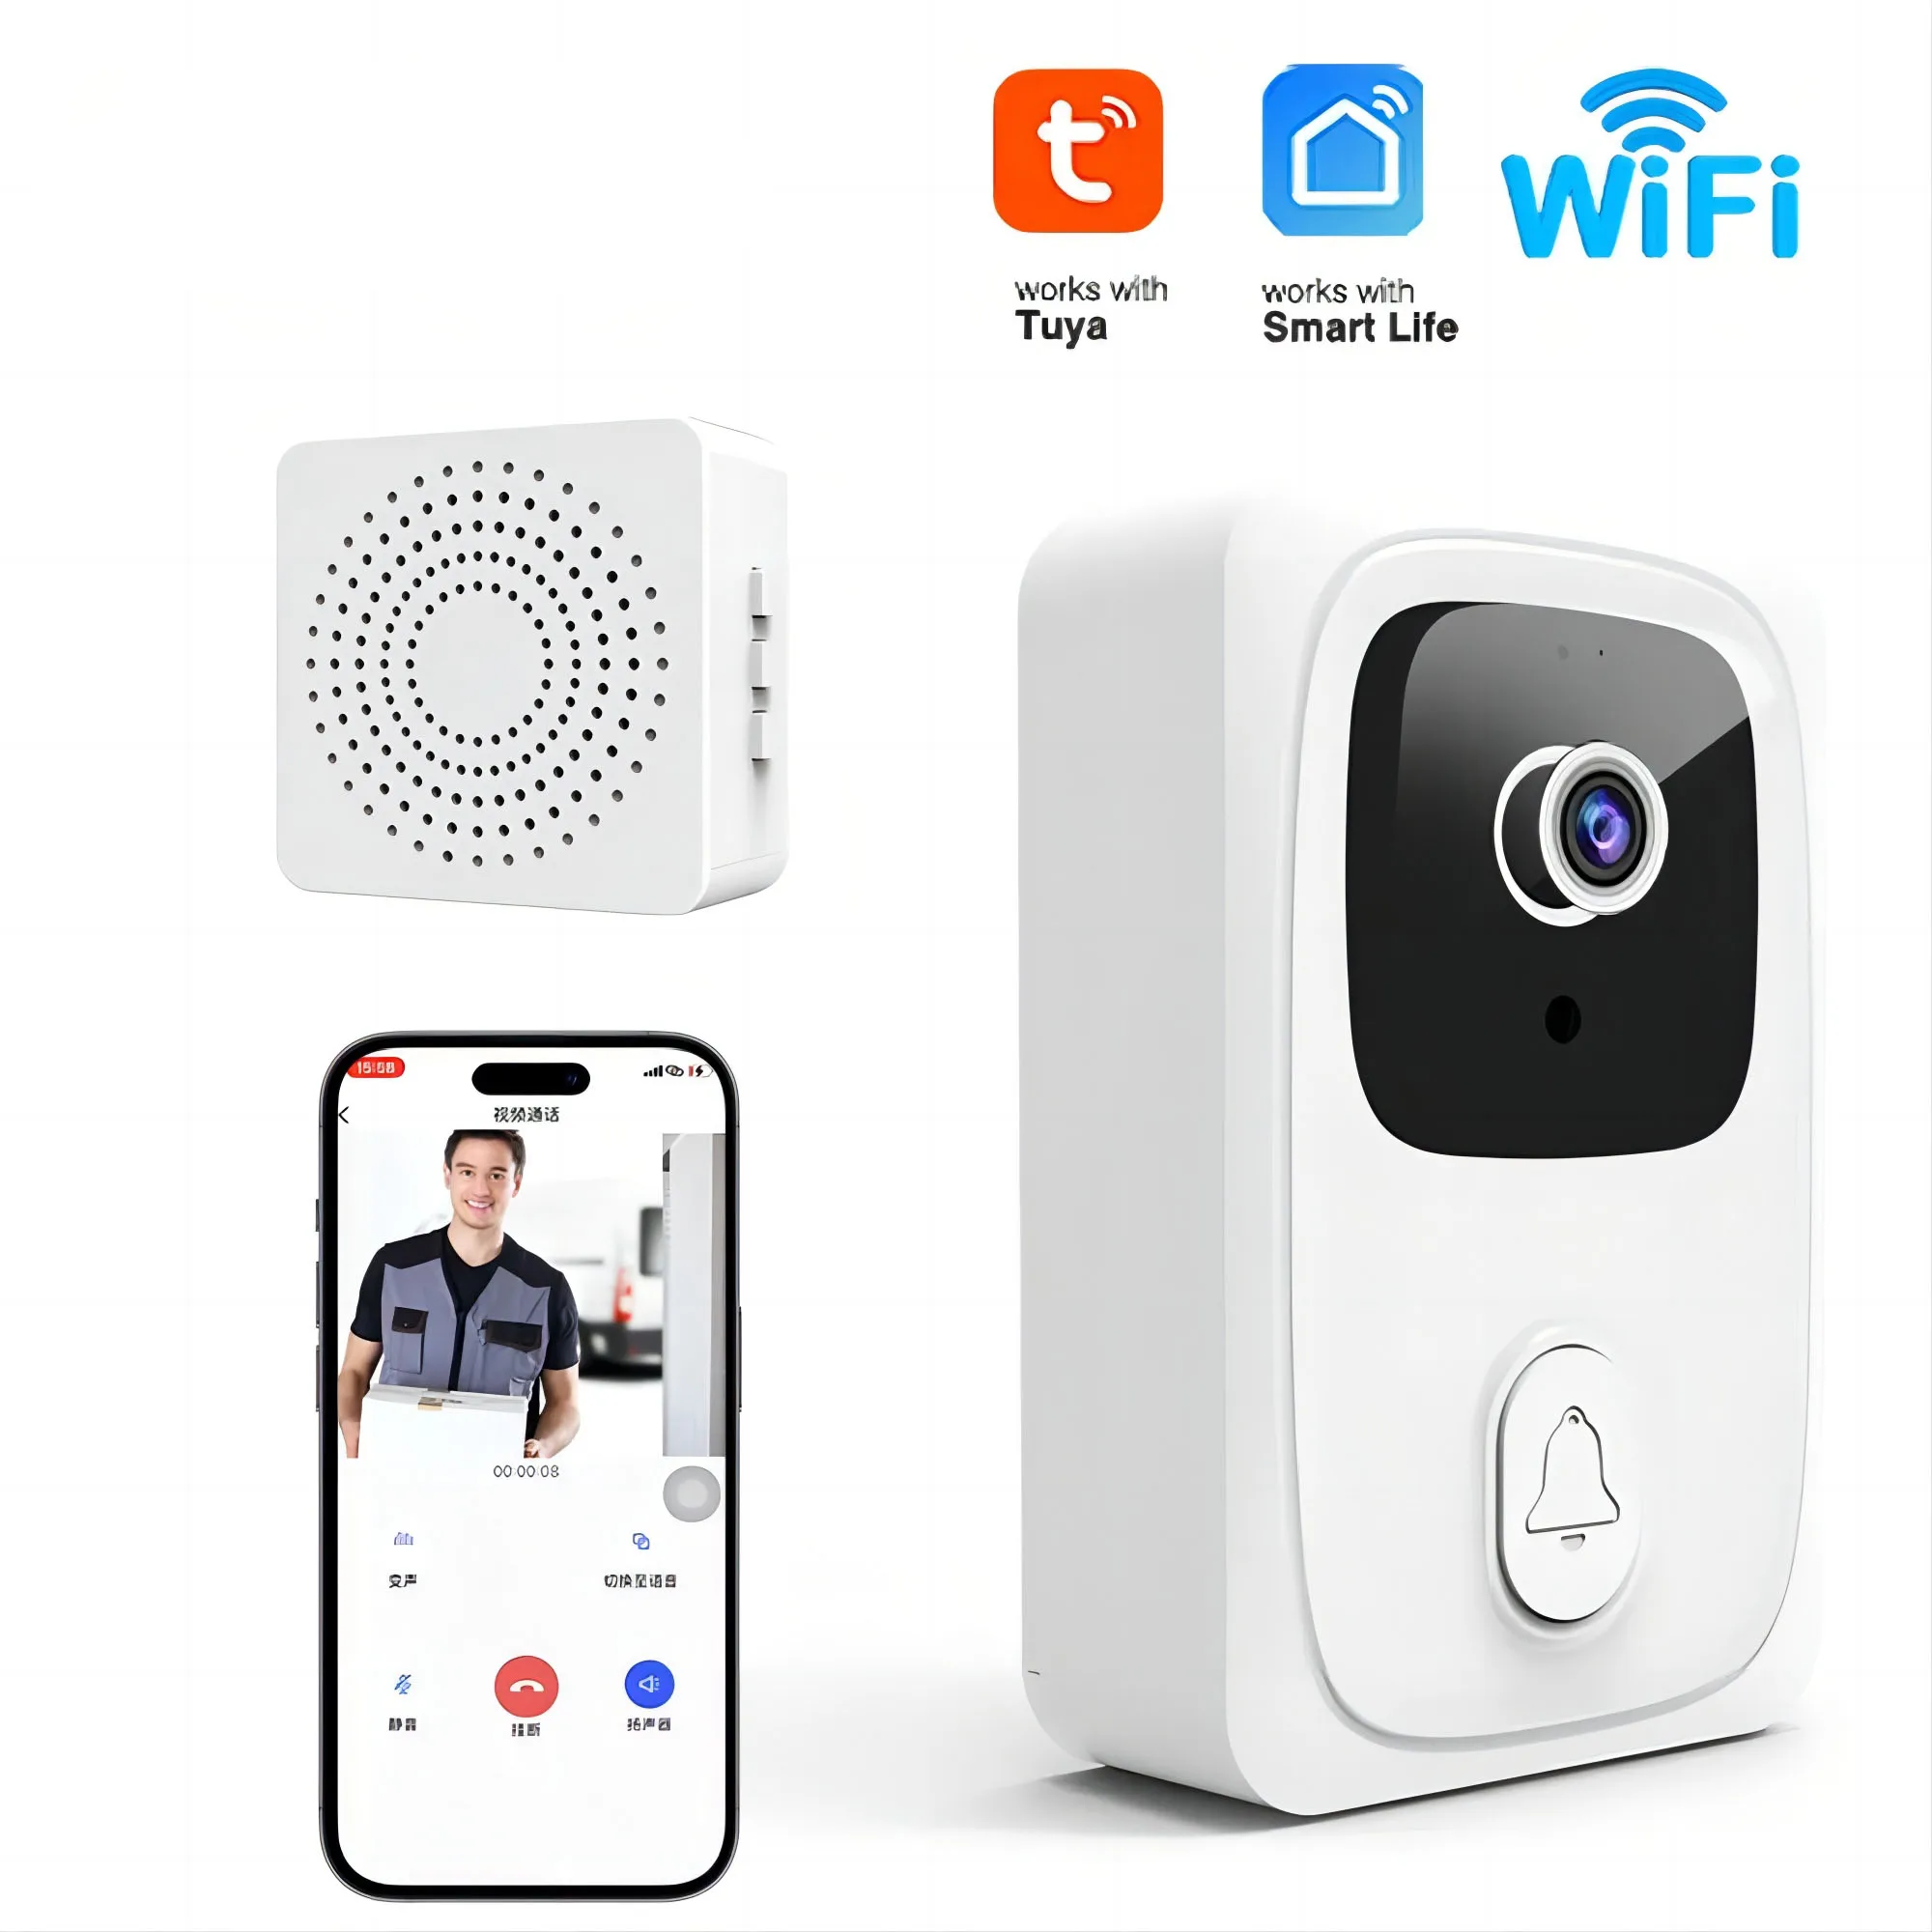 Tuya Video Doorbell Wireless WiFi Door Bell Camera Smart Home Security Night Vision Motion Detection Visual Intercom with Chime wireless wifi doorbell camera waterproof 720p hd video door bell smart outdoor video wireless doorbell with camera night vision